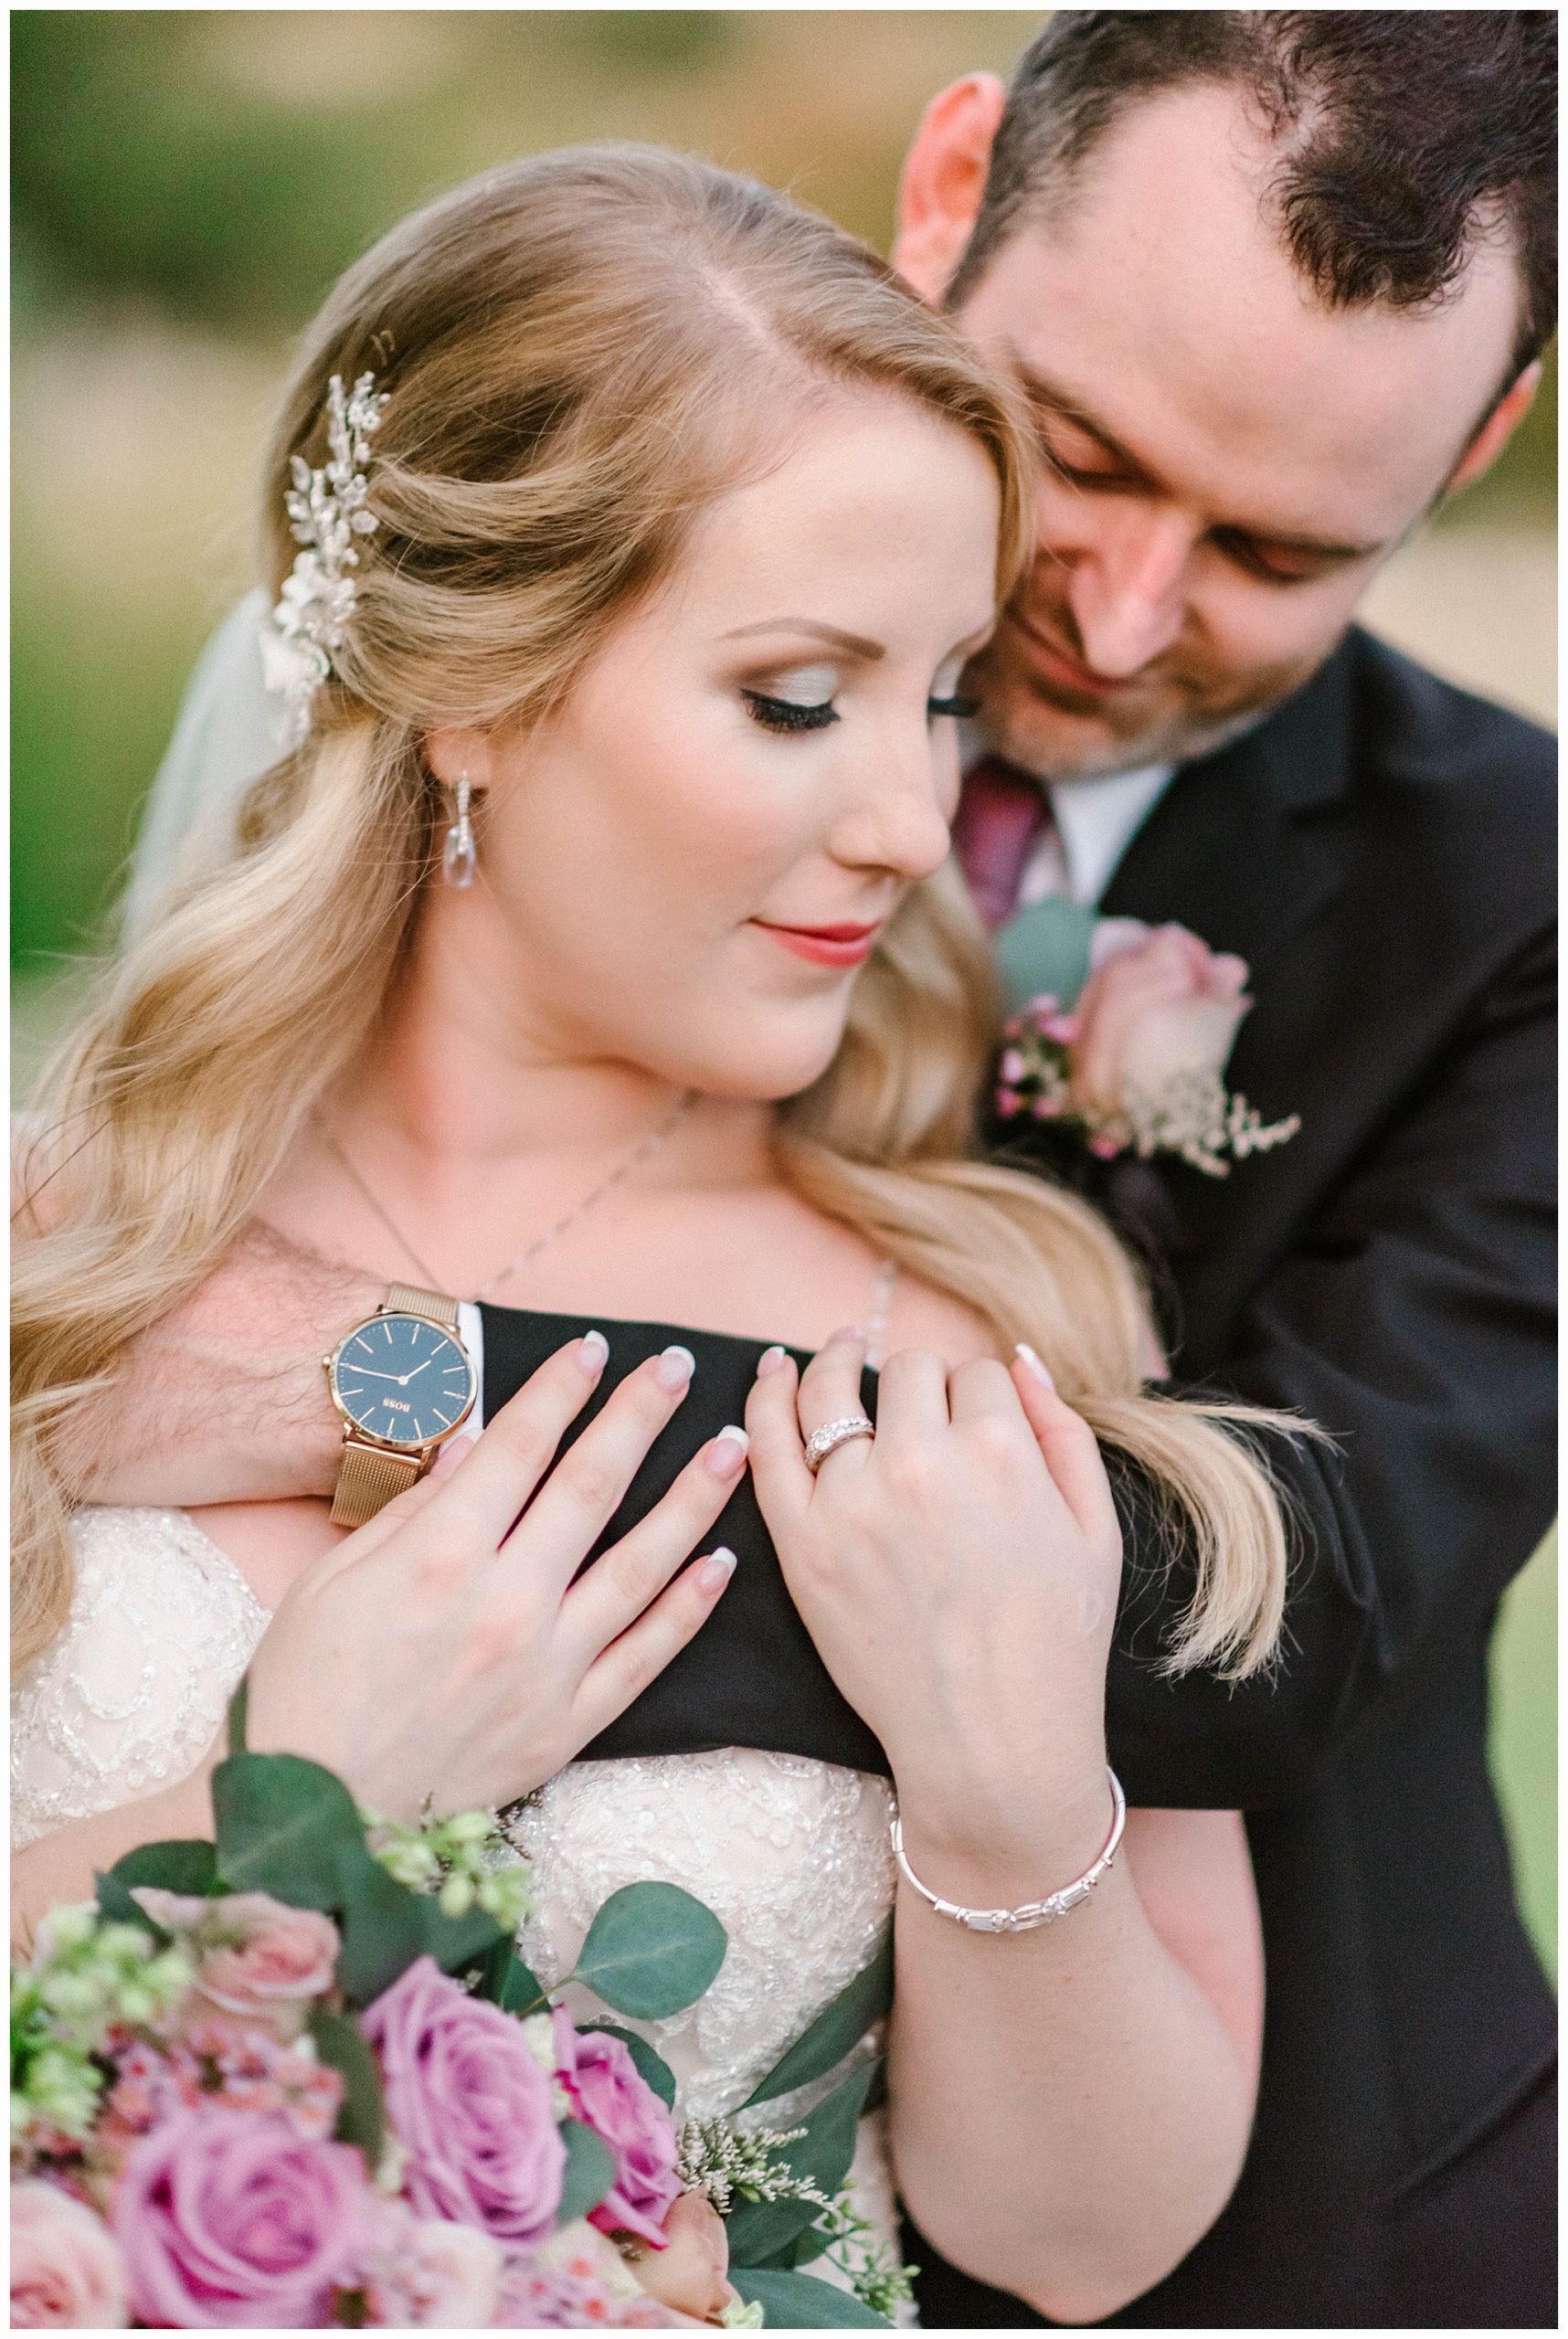 Bride and Groom with Stunning Violet Bouquet